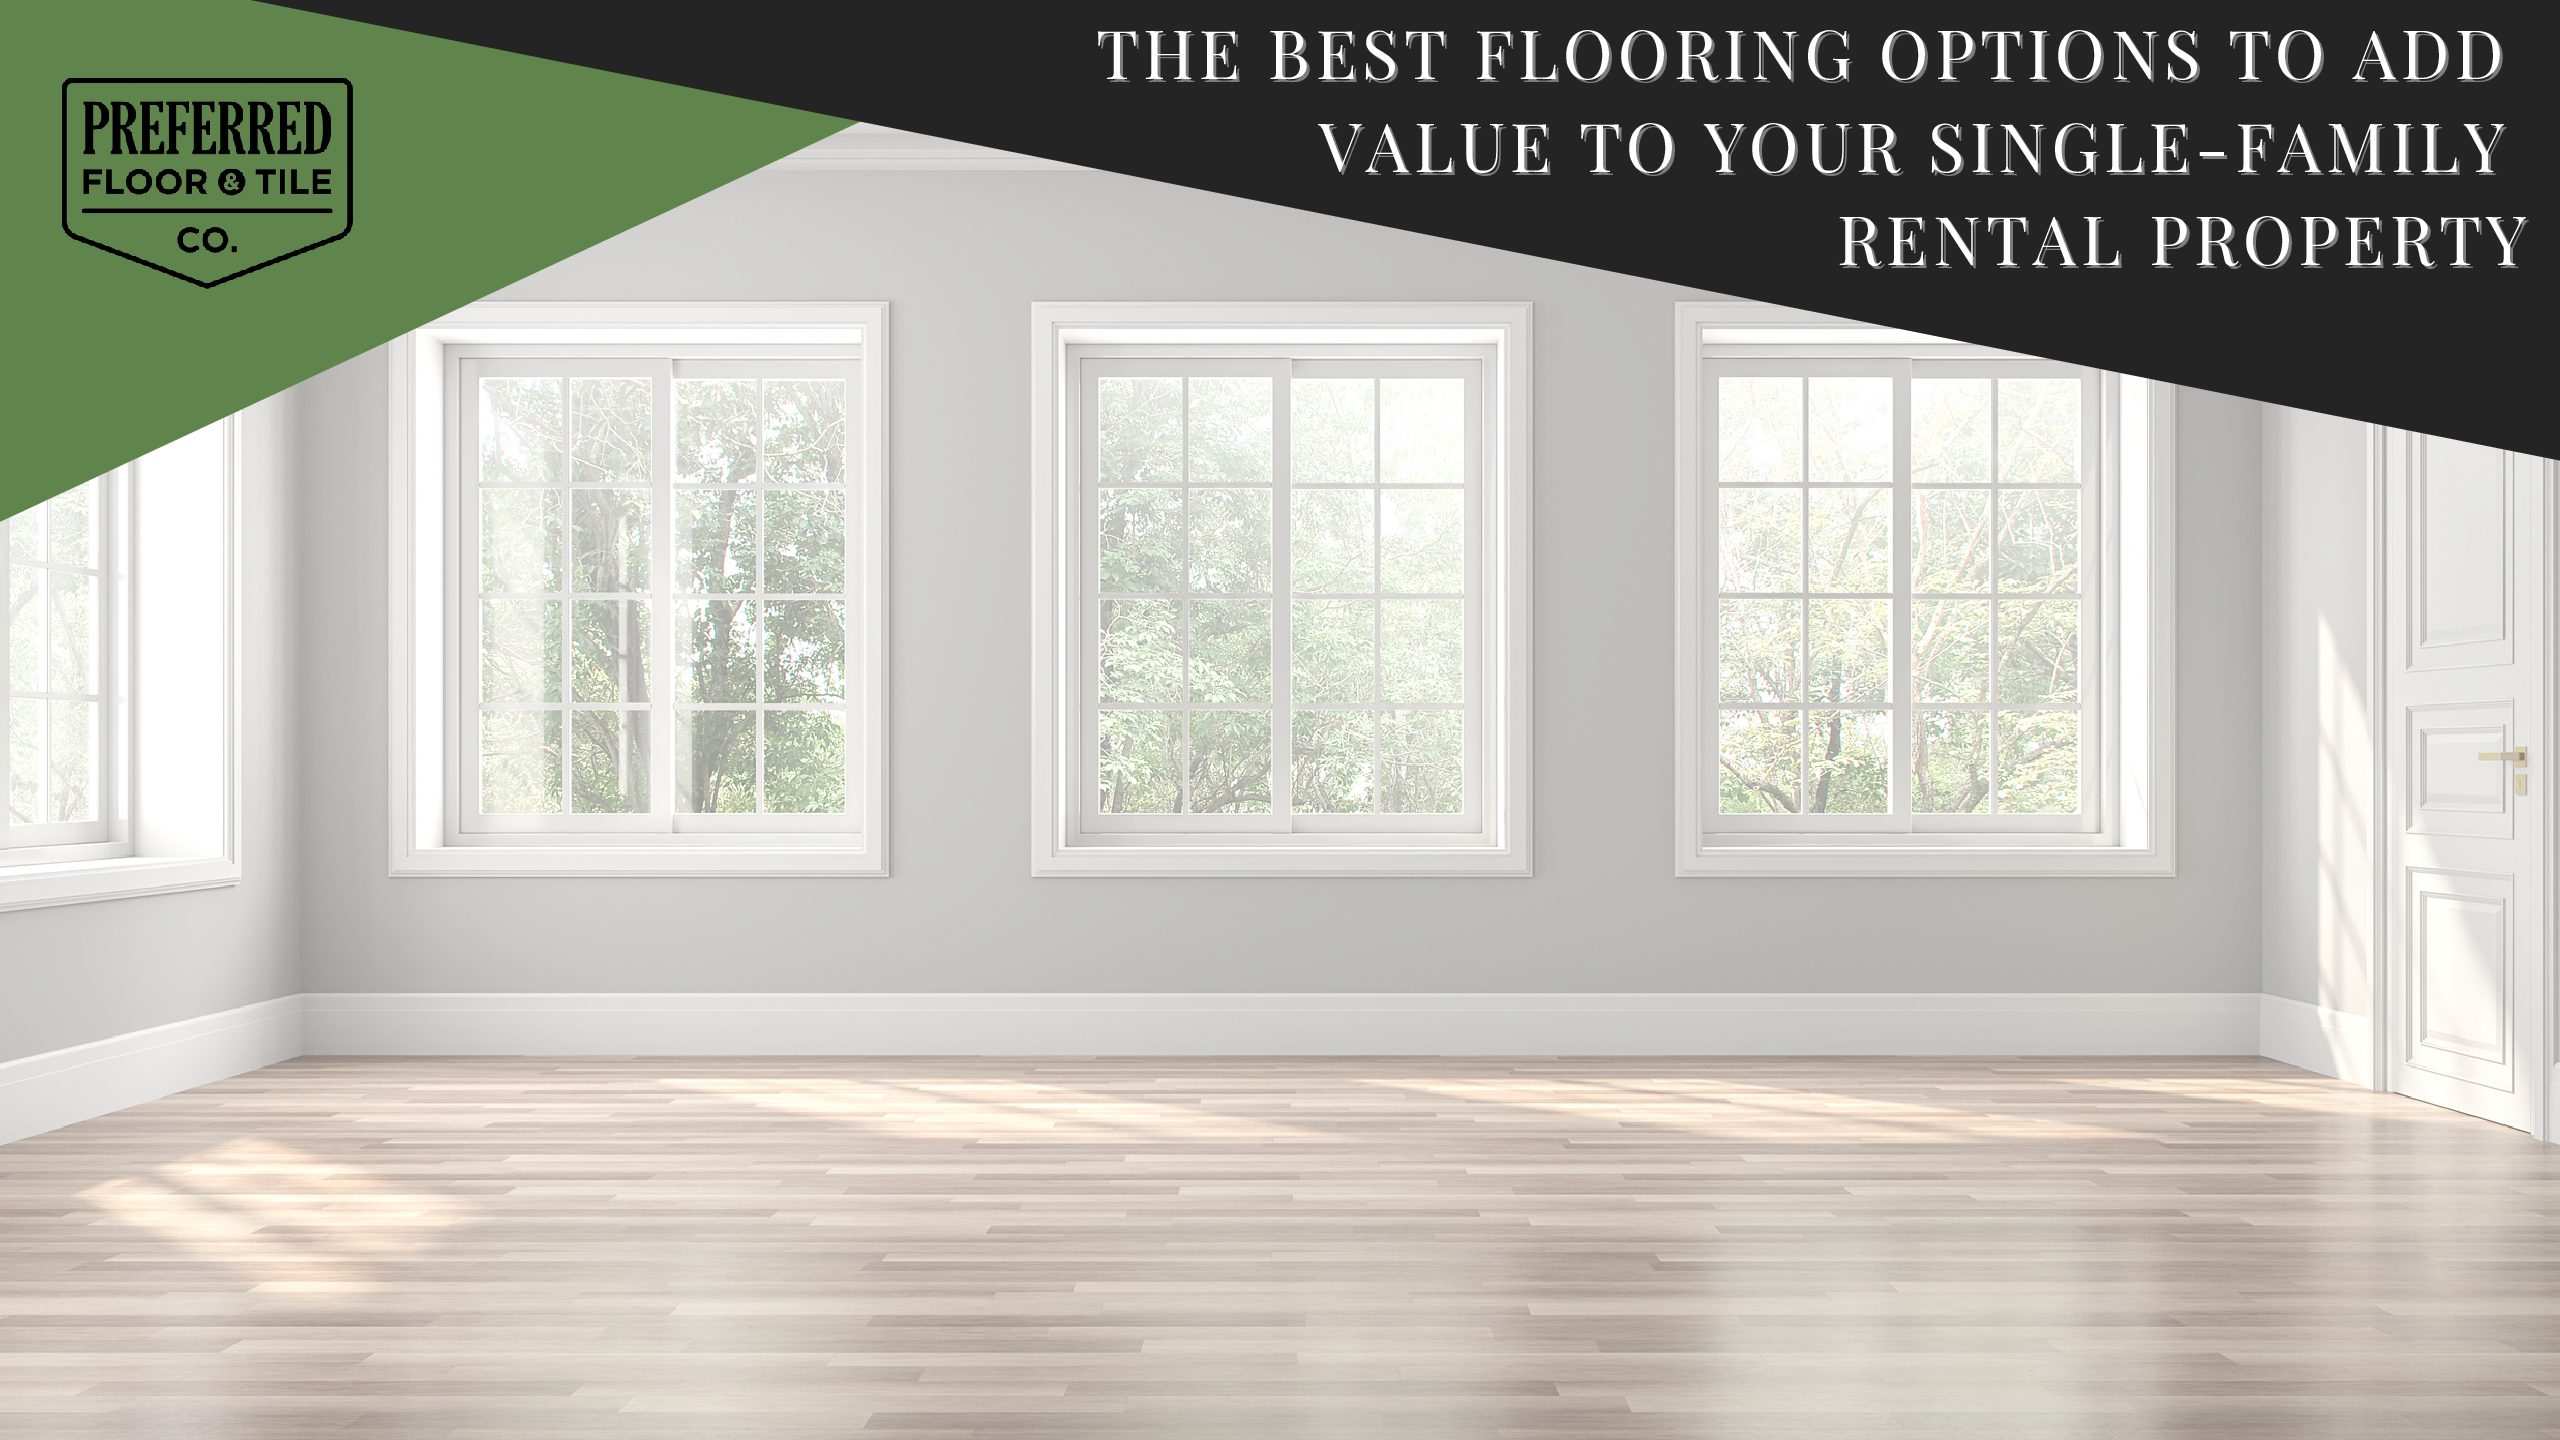 The Best Flooring Options to Add Value to Your Single-Family Rental Property